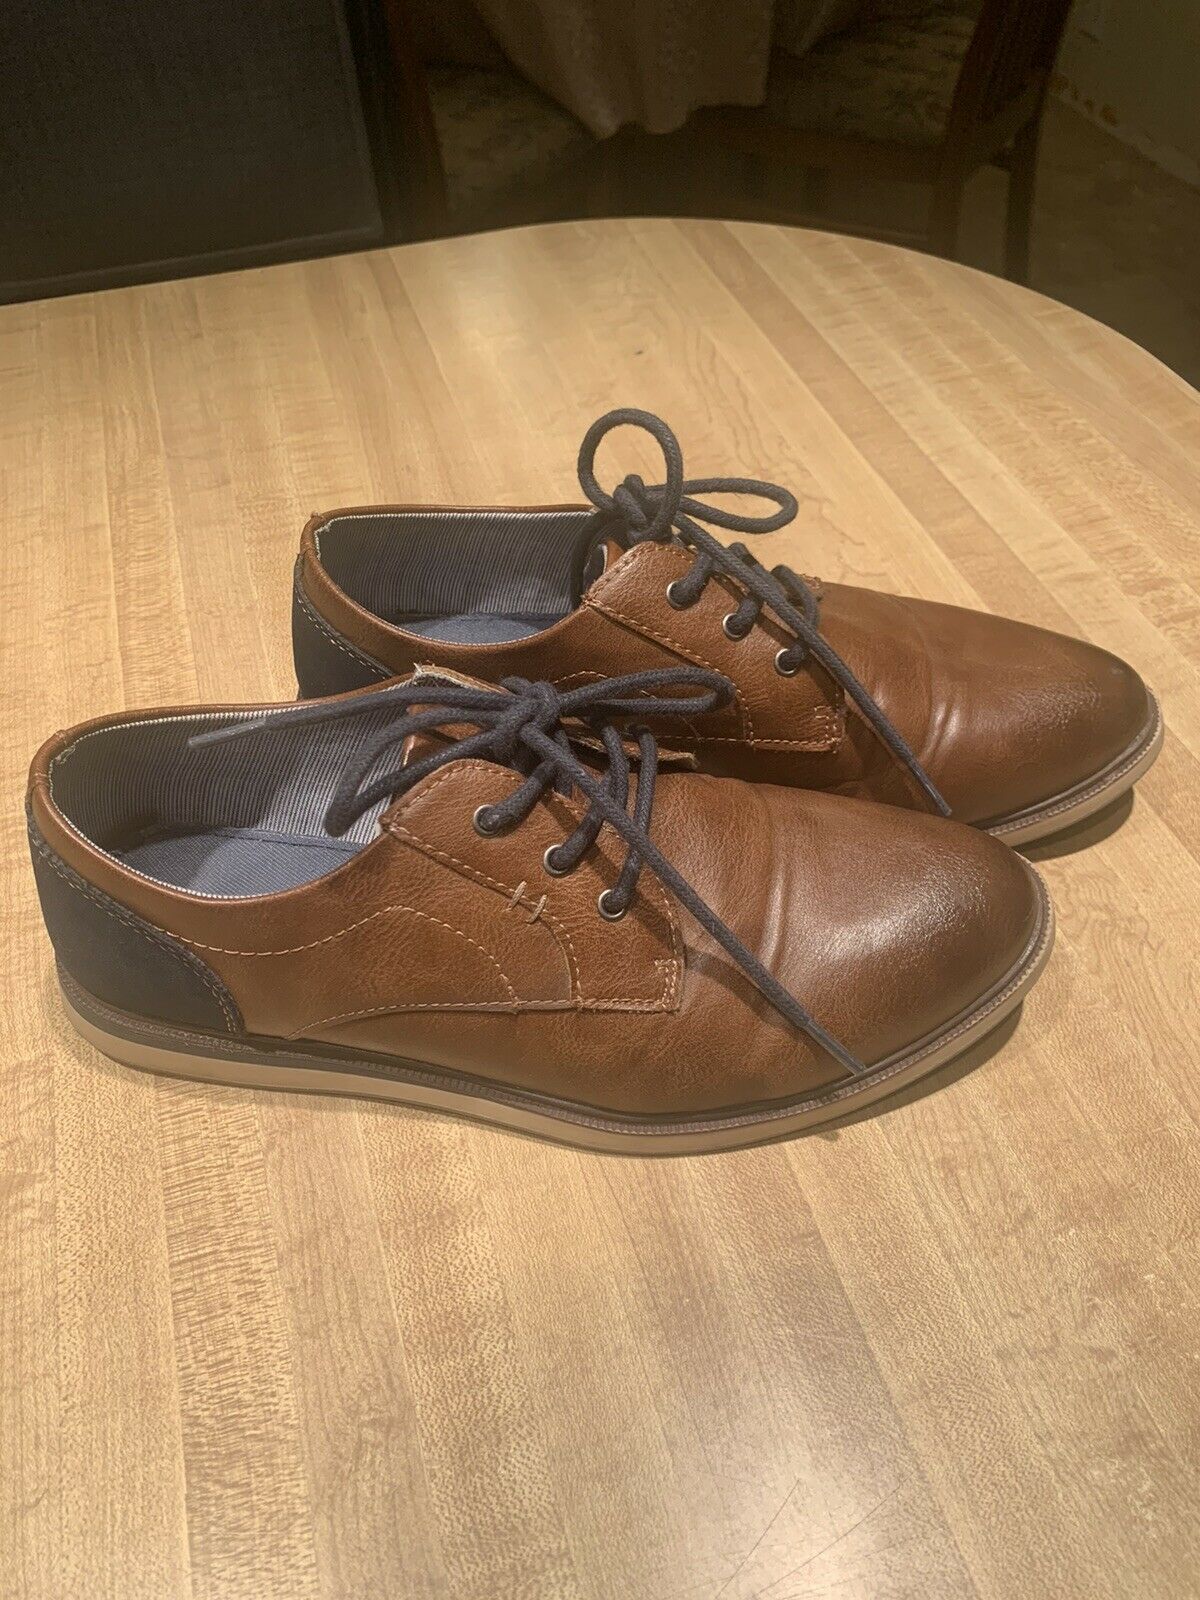 Max + Jake Boys Dress Shoes size 6M Brown Worn Once